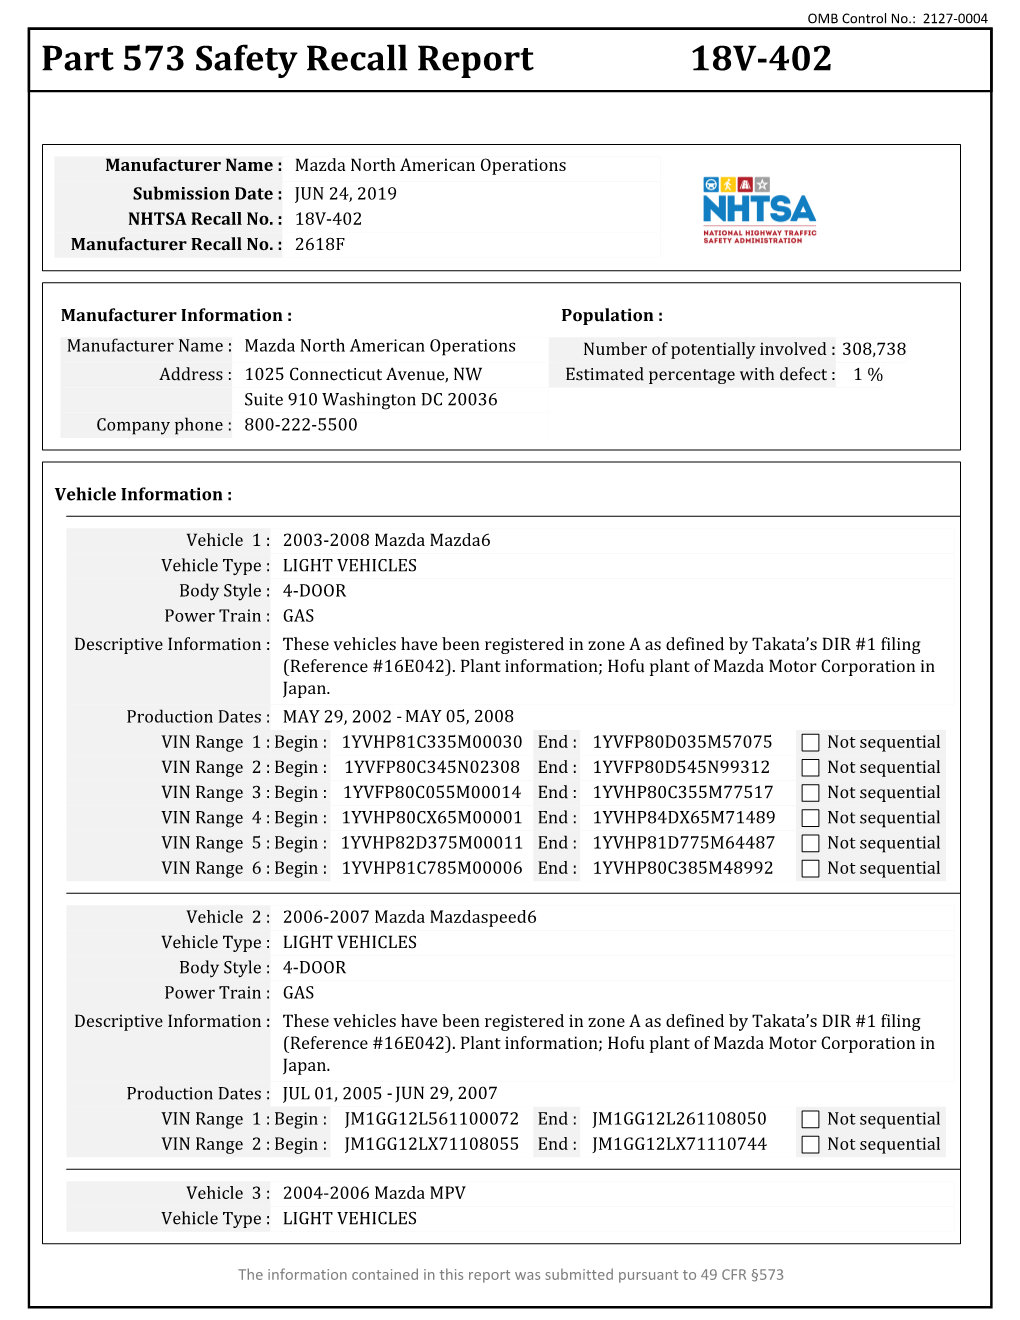 Part 573 Safety Recall Report 18V-402